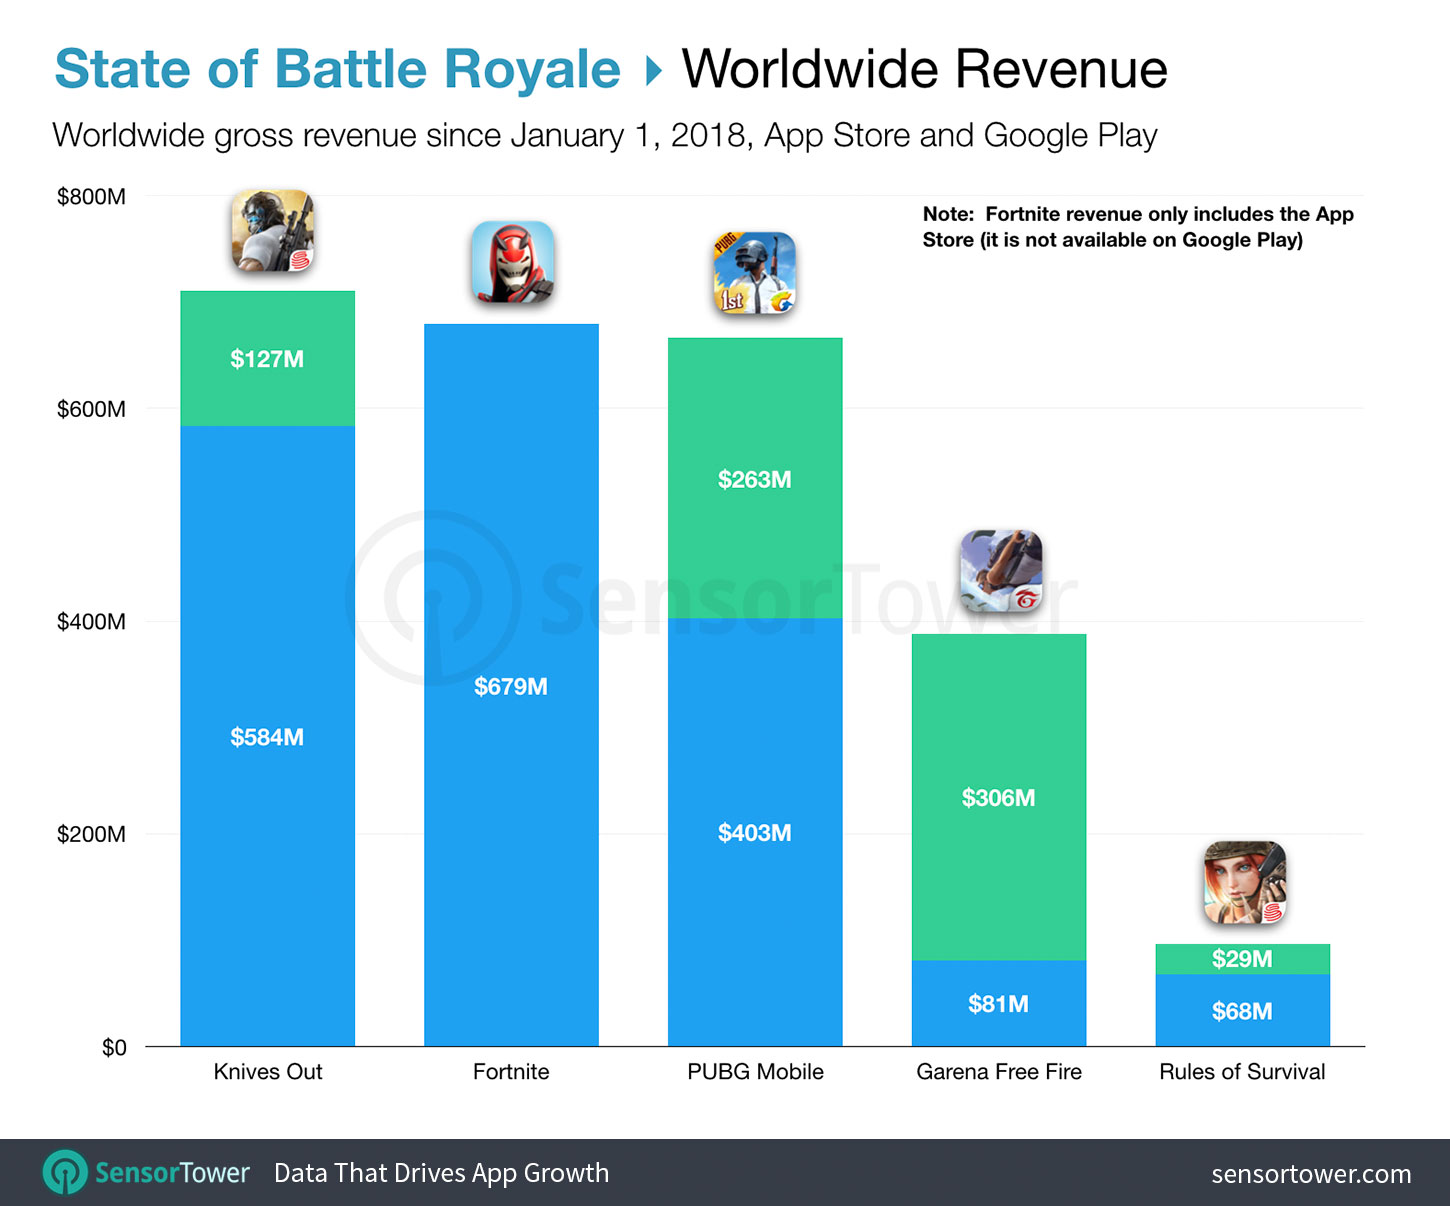 Стаьисьика самый популярный батл Роял. Top grossing mobile games 2021. Top mobile games by Worldwide revenue. Use of mobile apps by category in Jan 2018.